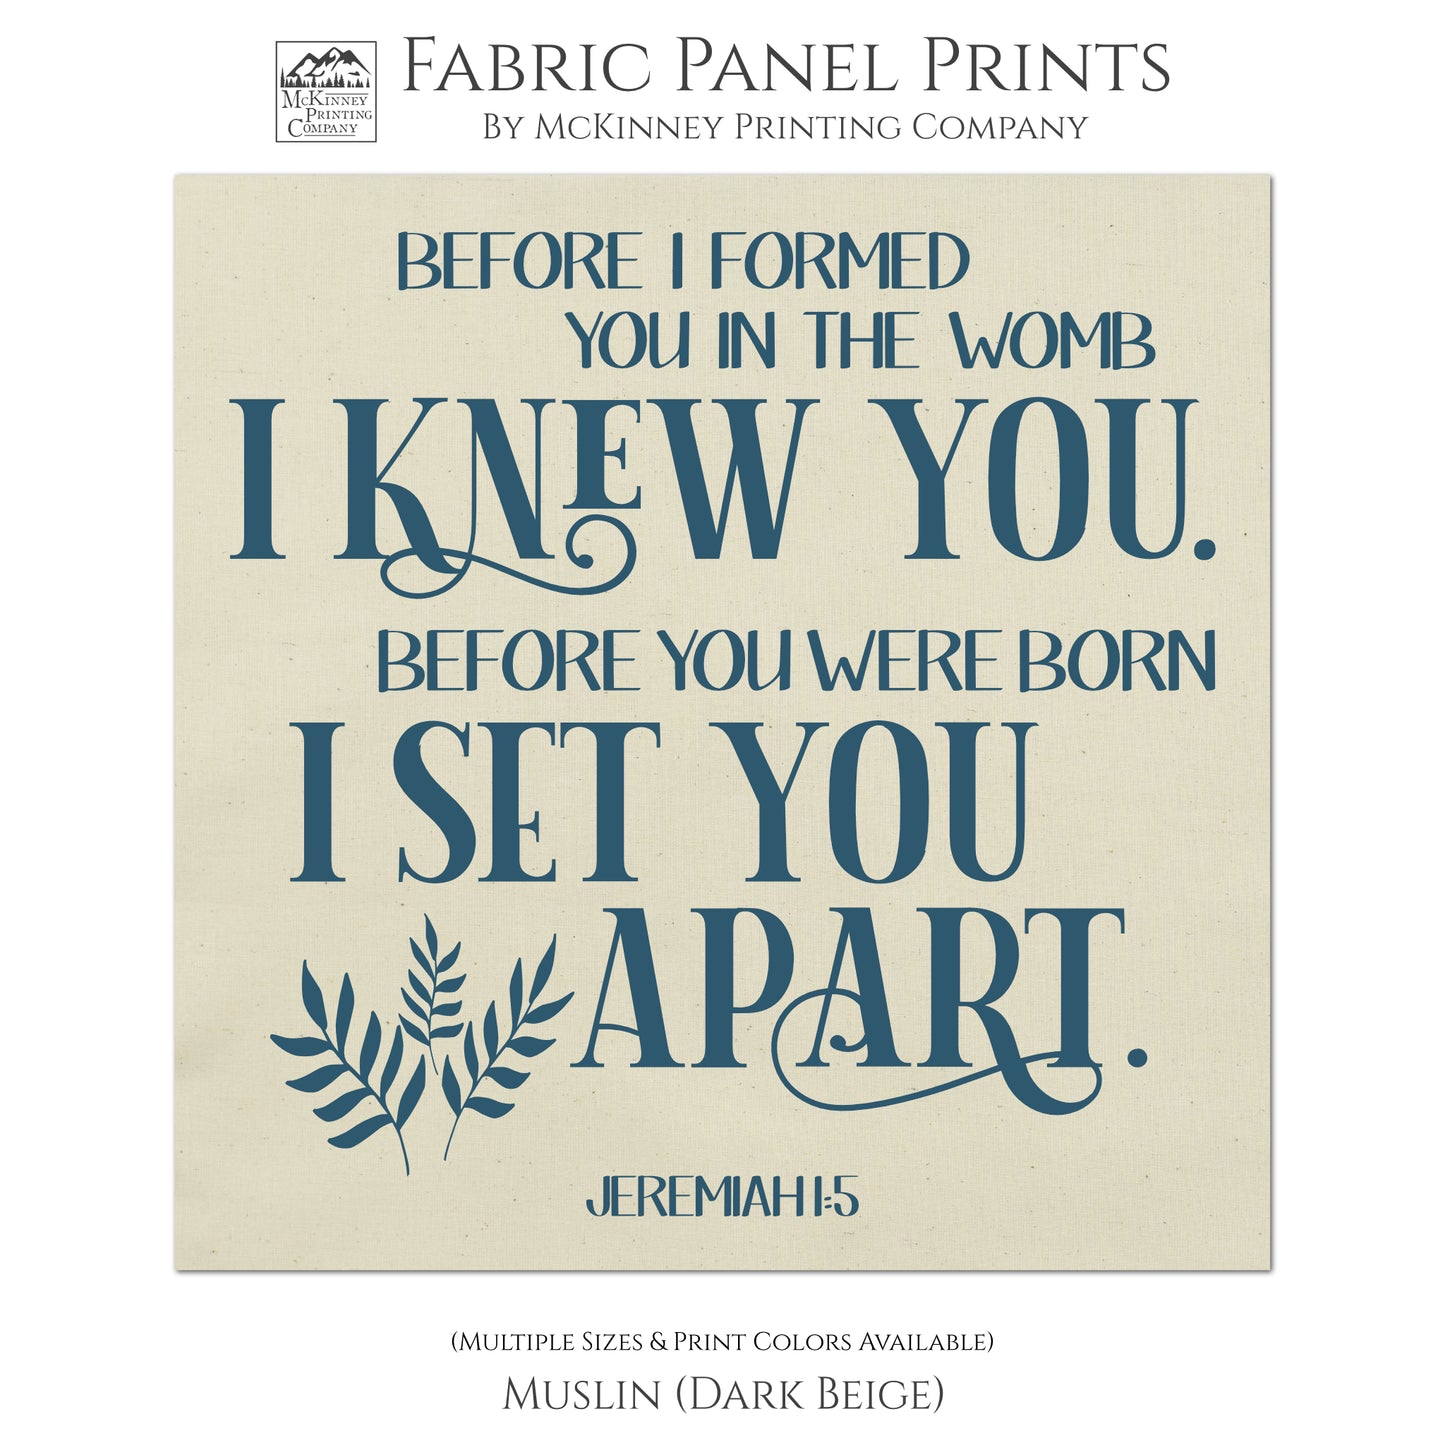 Before I formed you in the womb I knew you. Before you were born I set you apart. - Jeremiah1:5, Quilt Block, Fabric Panel Print - Muslin